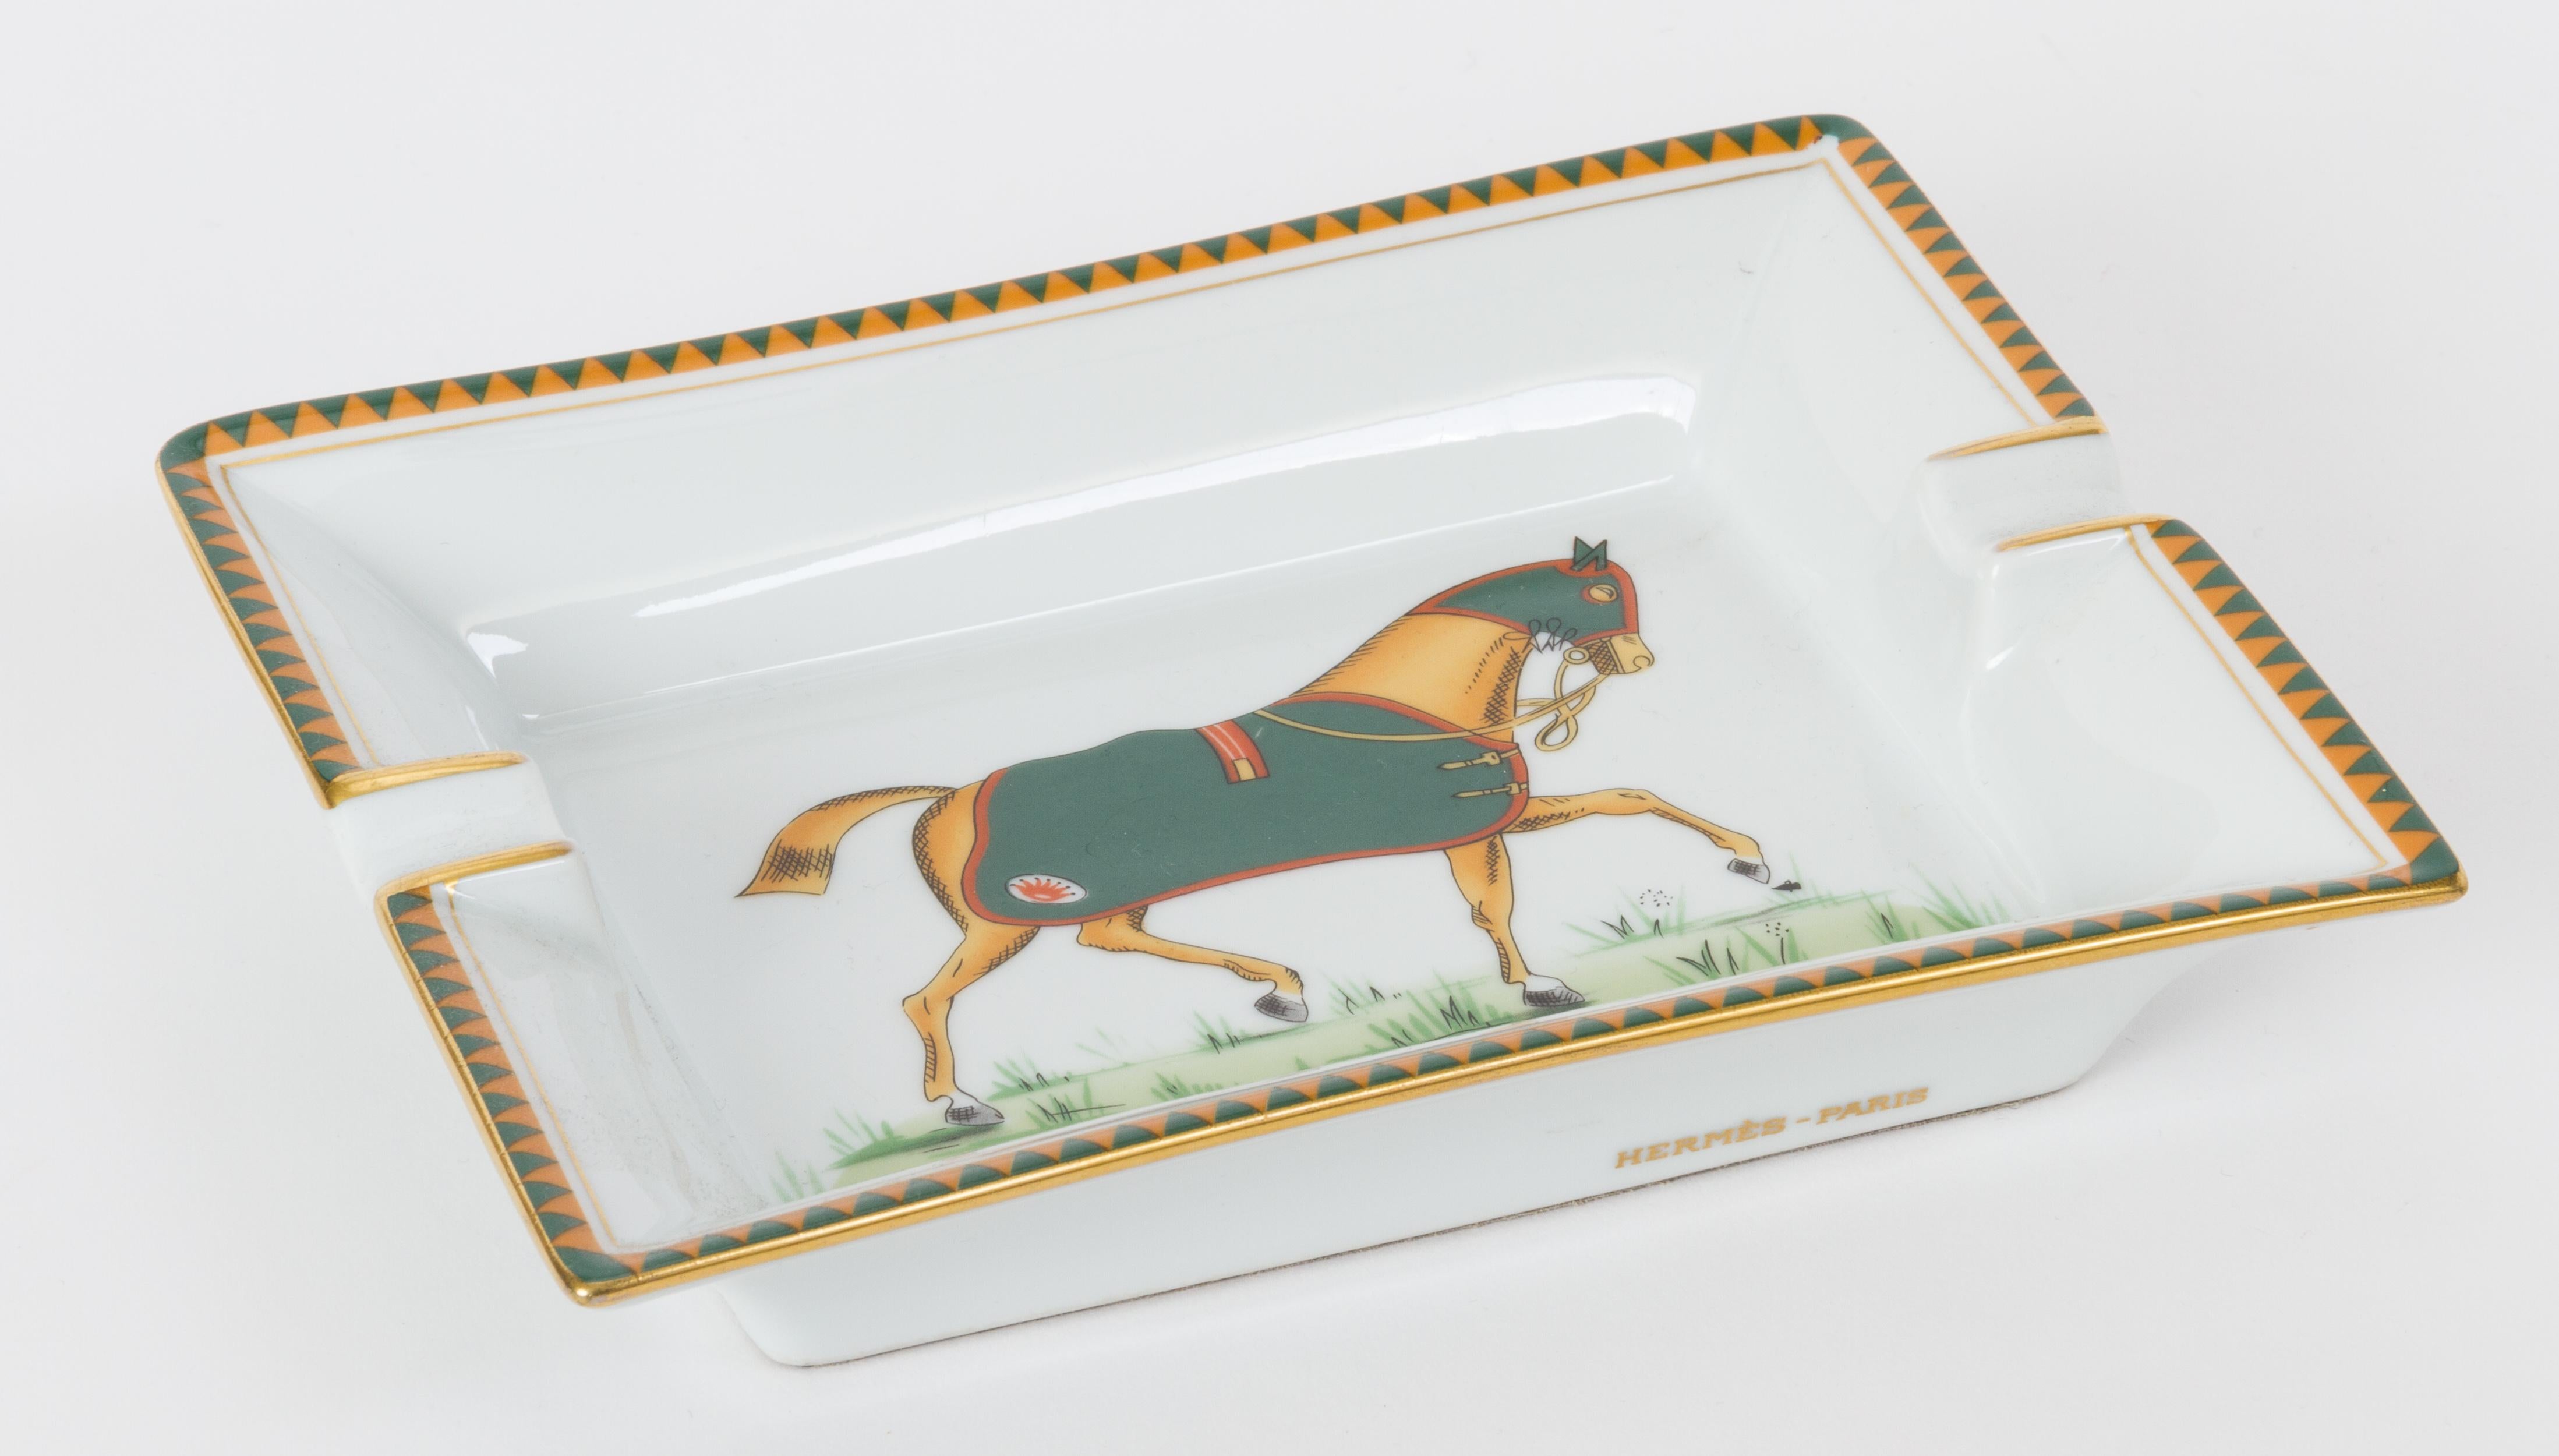 Hermès white porcelain ashtray with a green horse design. Minor wear on suede underside. Does not include box